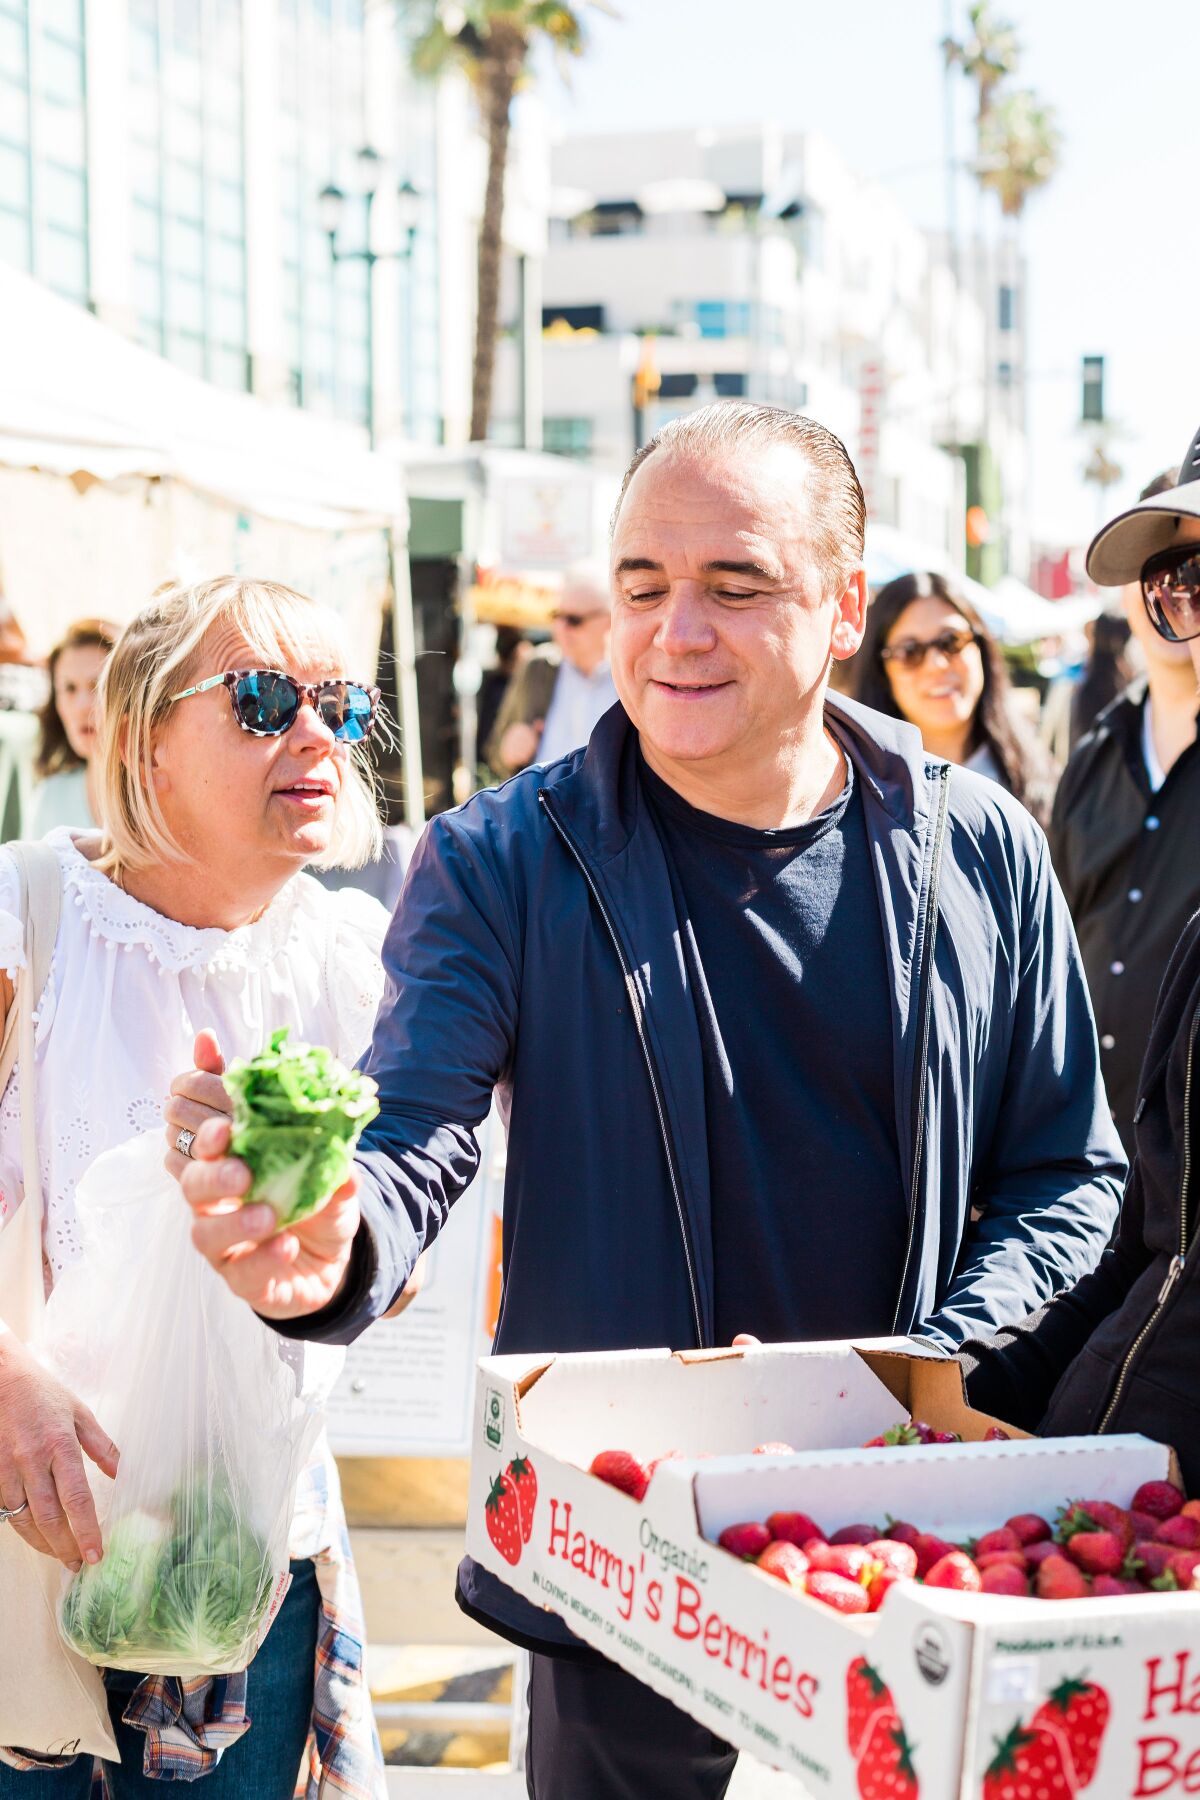 Jean-Georges Vongerichten runs into L.A. pastry chef Sherry Yard while shopping for vegetables.